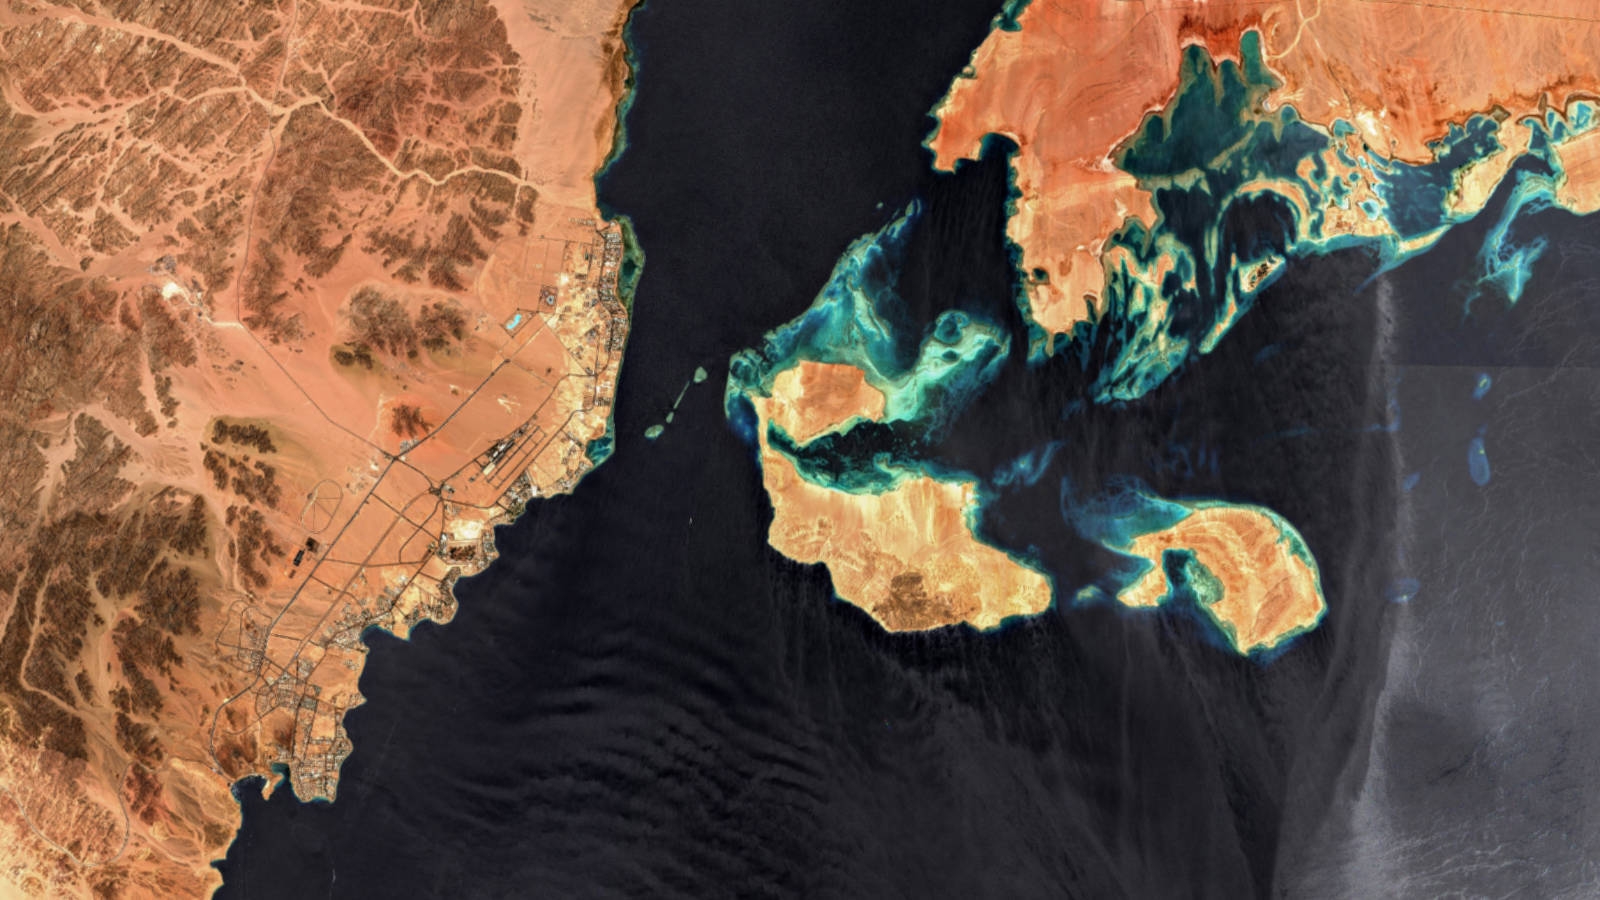 This handout satellite image made available by the European Space Agency and captured by the Copernicus Sentinel-2 mission on July 9, 2022 shows a view of the Strait of Tiran at the mouth of the Red Sea's Gulf of Aqaba (top), with (L to R) the Egyptian Sinai mainland with the Ras Mohamed nature reserve and the city of Sharm el-Sheikh, the islands of Tiran and Sanafir, and the new city of "Neom" currently under construction in the Saudi Arabian mainland.